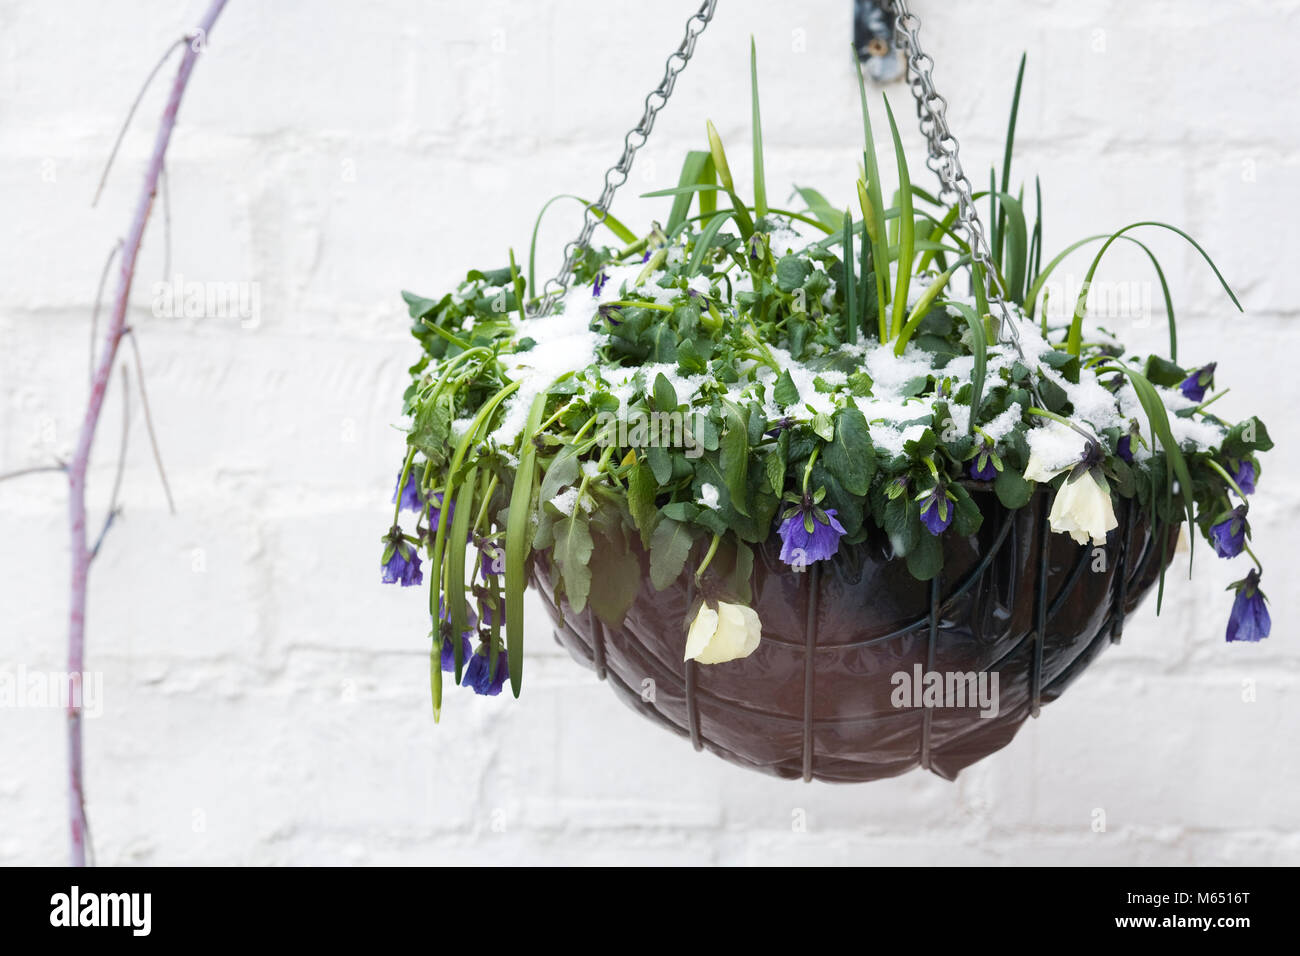 Hanging basket with pansies and bulbs affected by the cold weather. Stock Photo